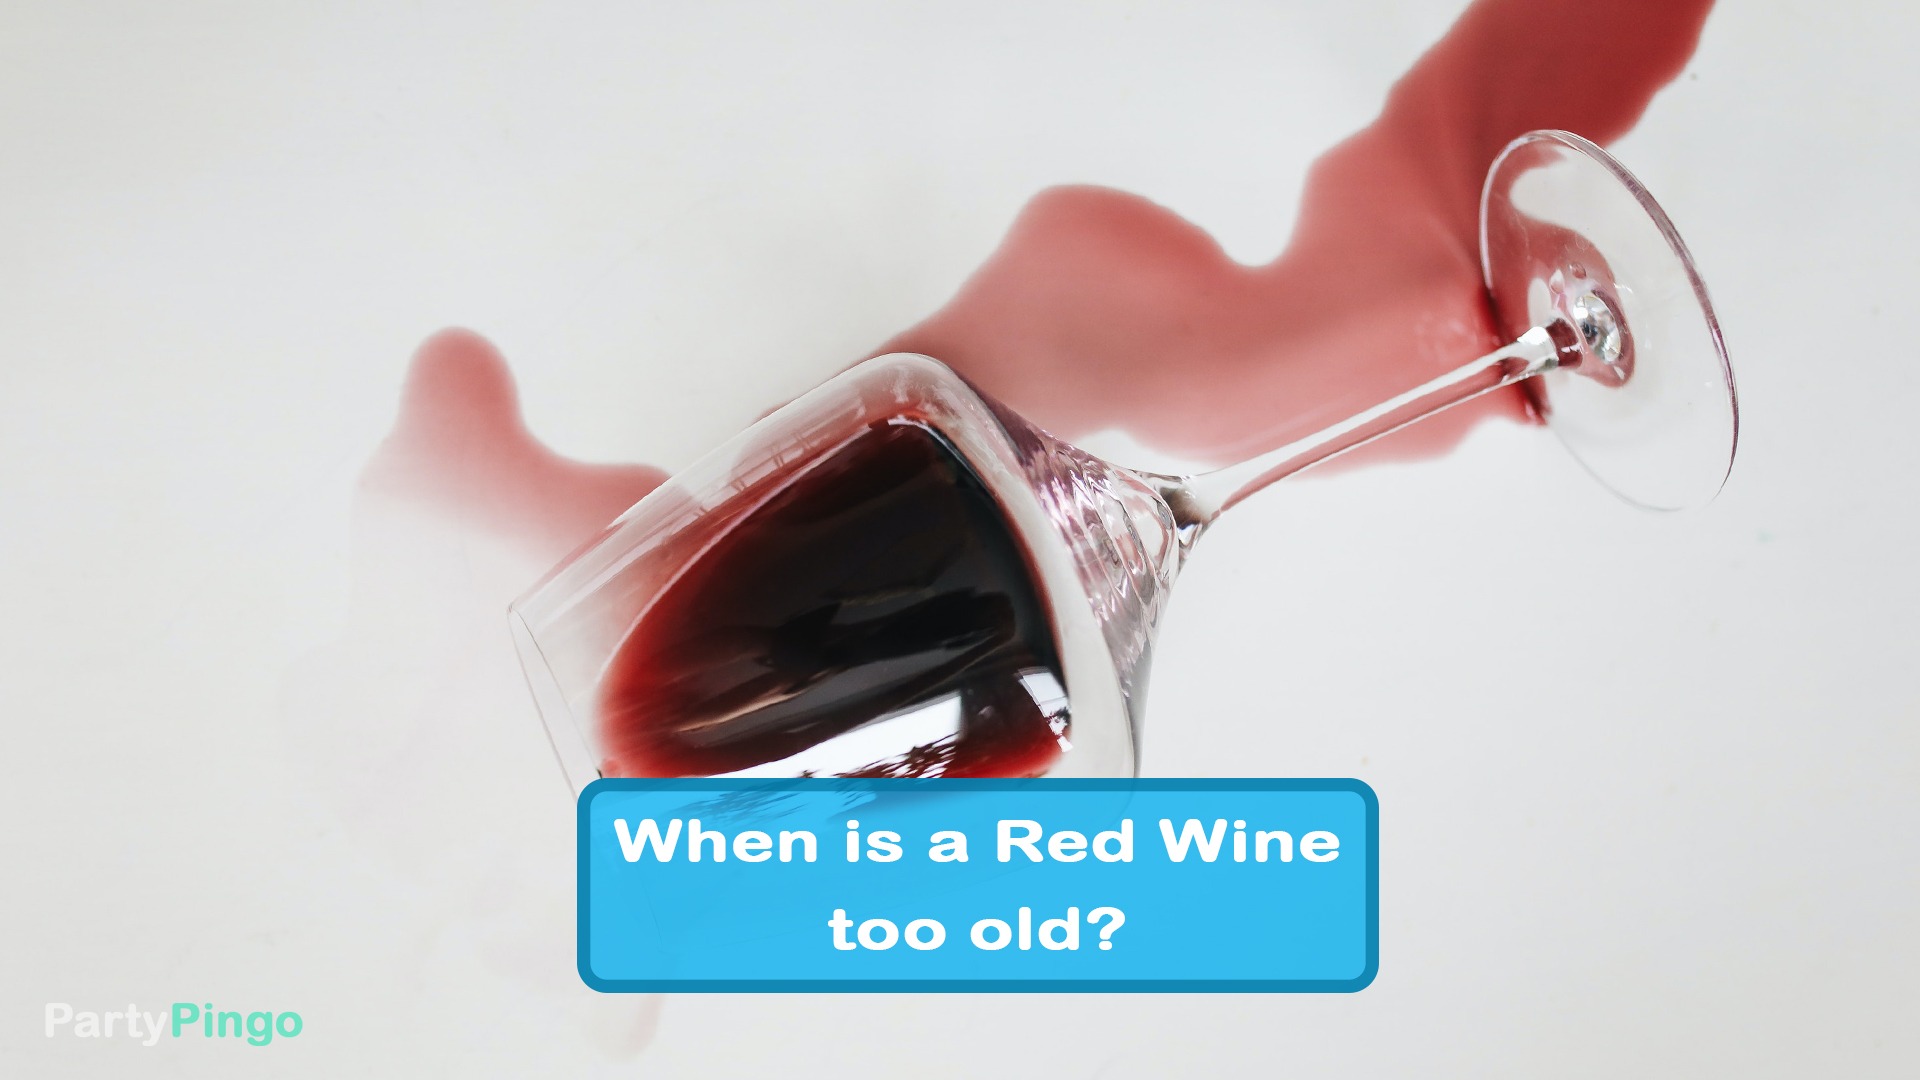 When is a Red Wine too old?